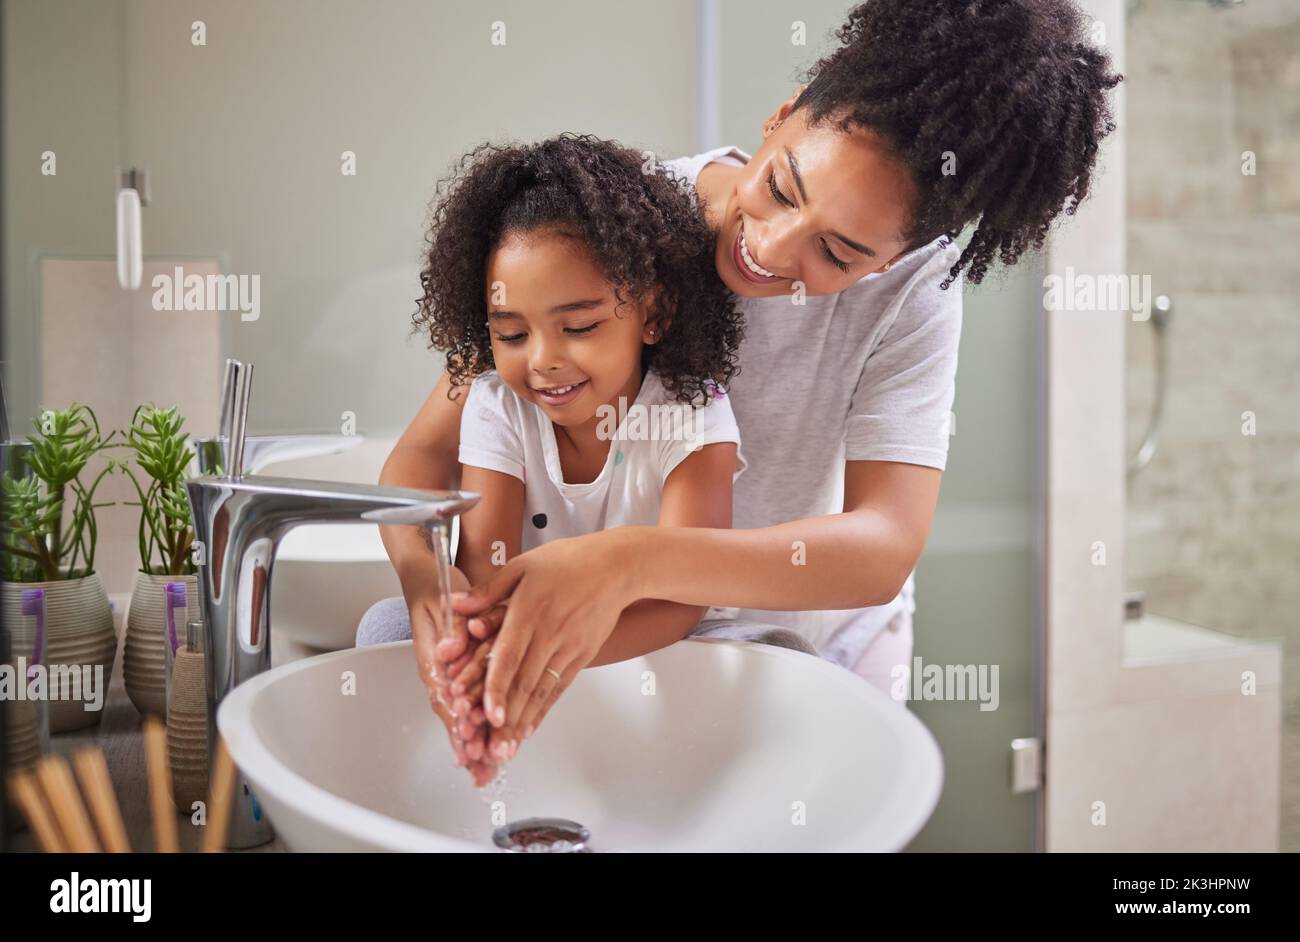 Family, washing hands and child with mom rinsing, cleaning and good hygiene against bacteria or germs for infection or virus protection in bathroom Stock Photo